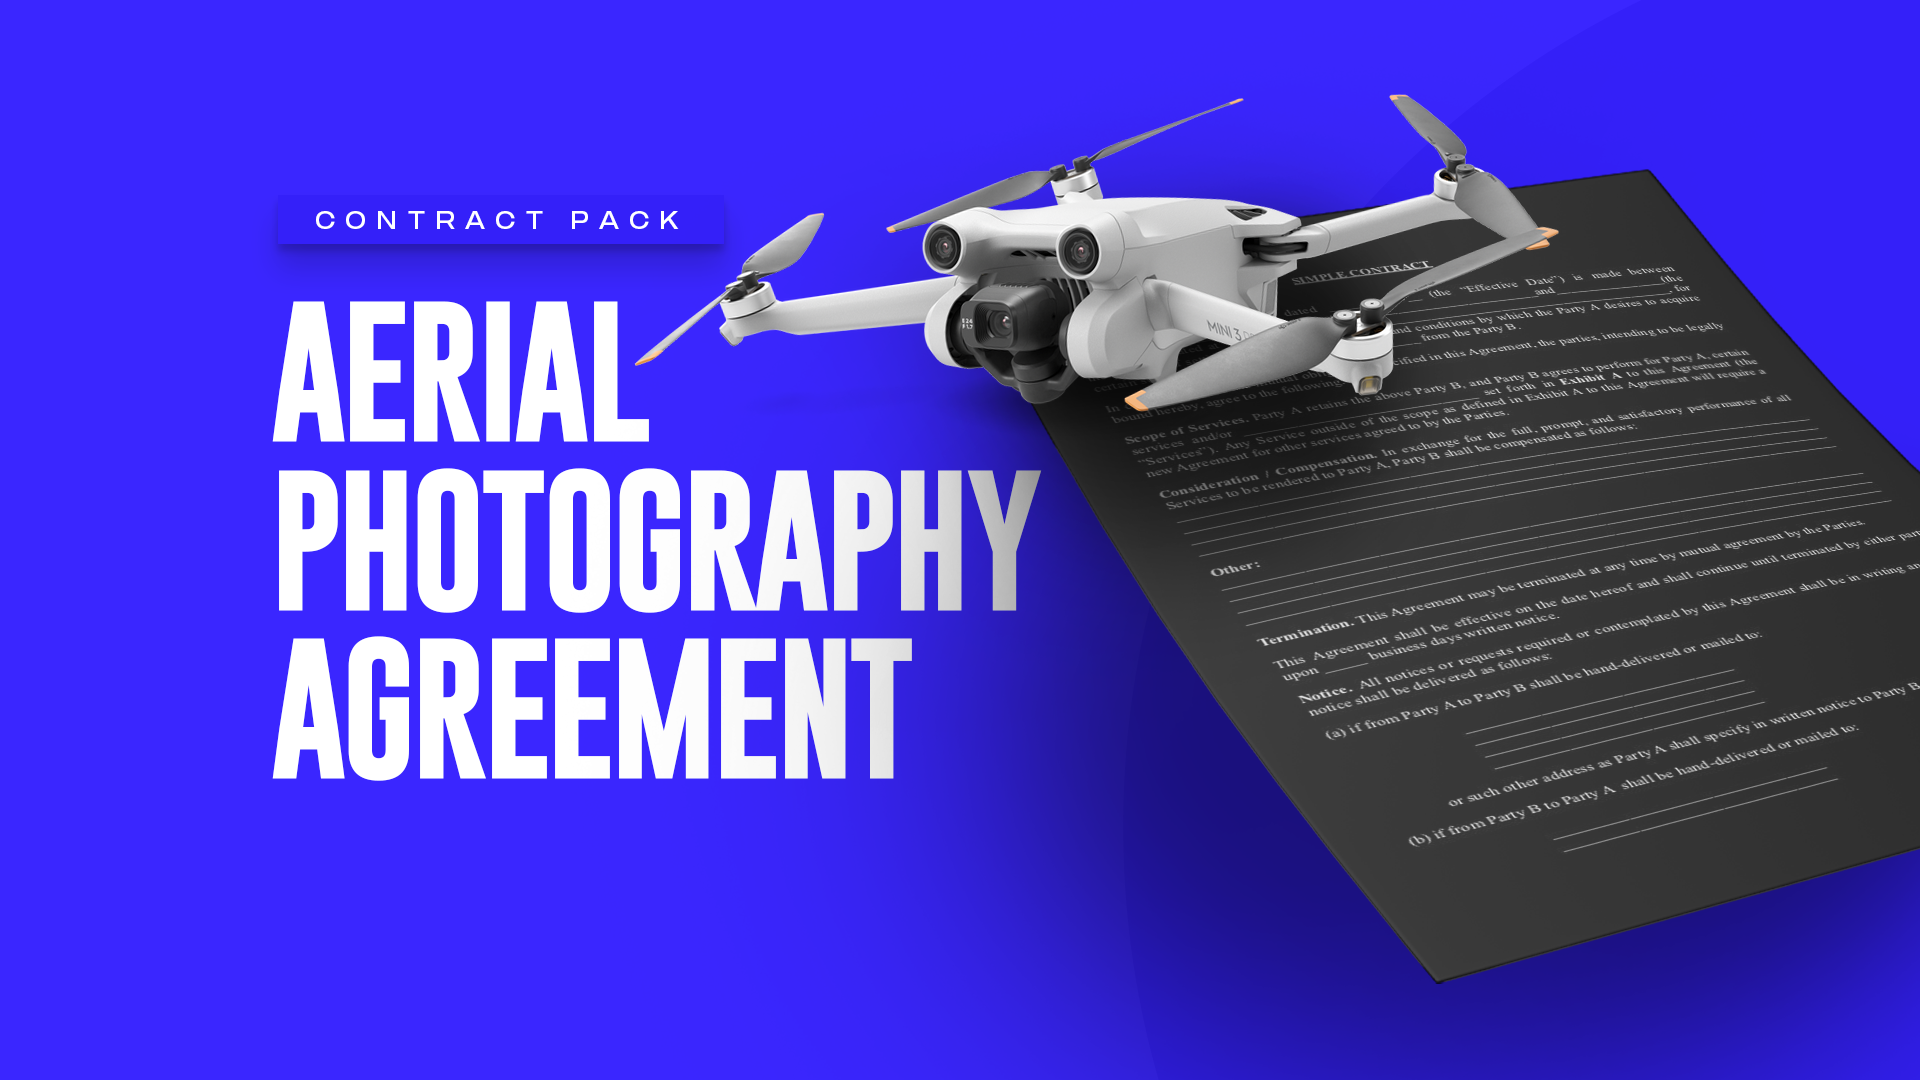 Aerial Photography Agreement.png